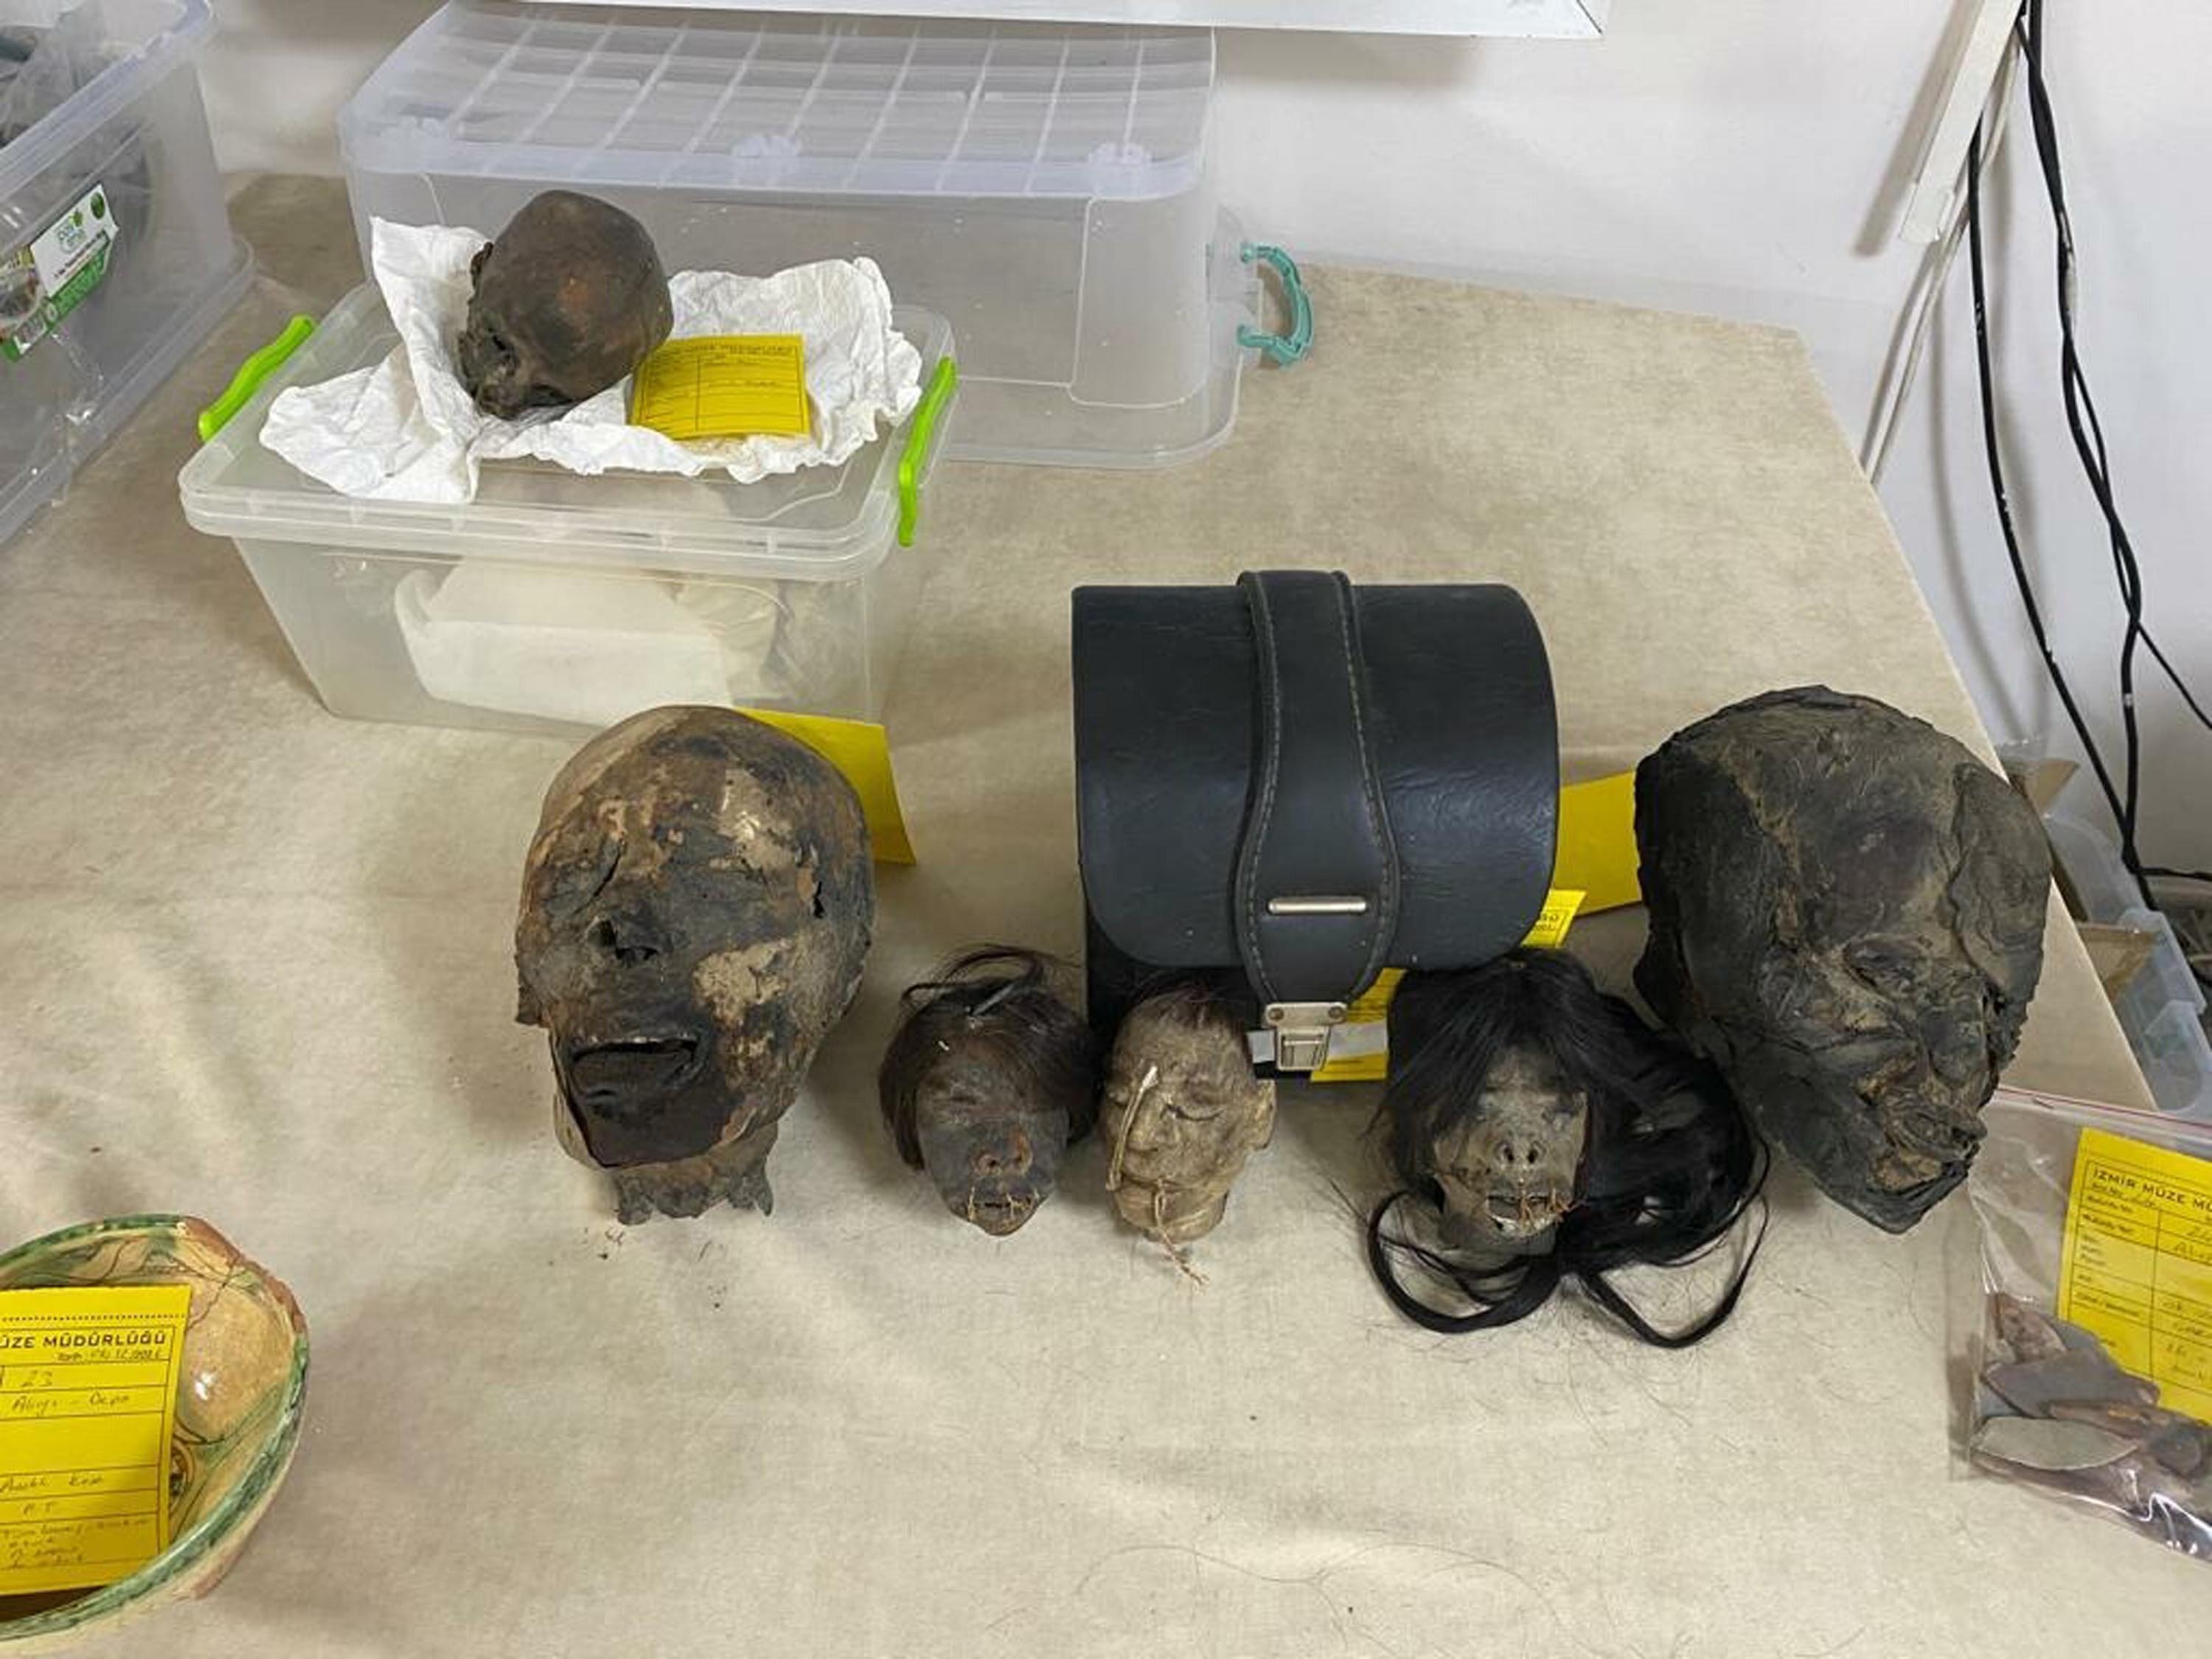 Several 'tsantas', or 'shrunken' heads, believed to have originated in Peru and confiscated by authorities in December 2021 are cataloged at a police station in Izmir, Turkey, May 20, 2022. (AA Photo)